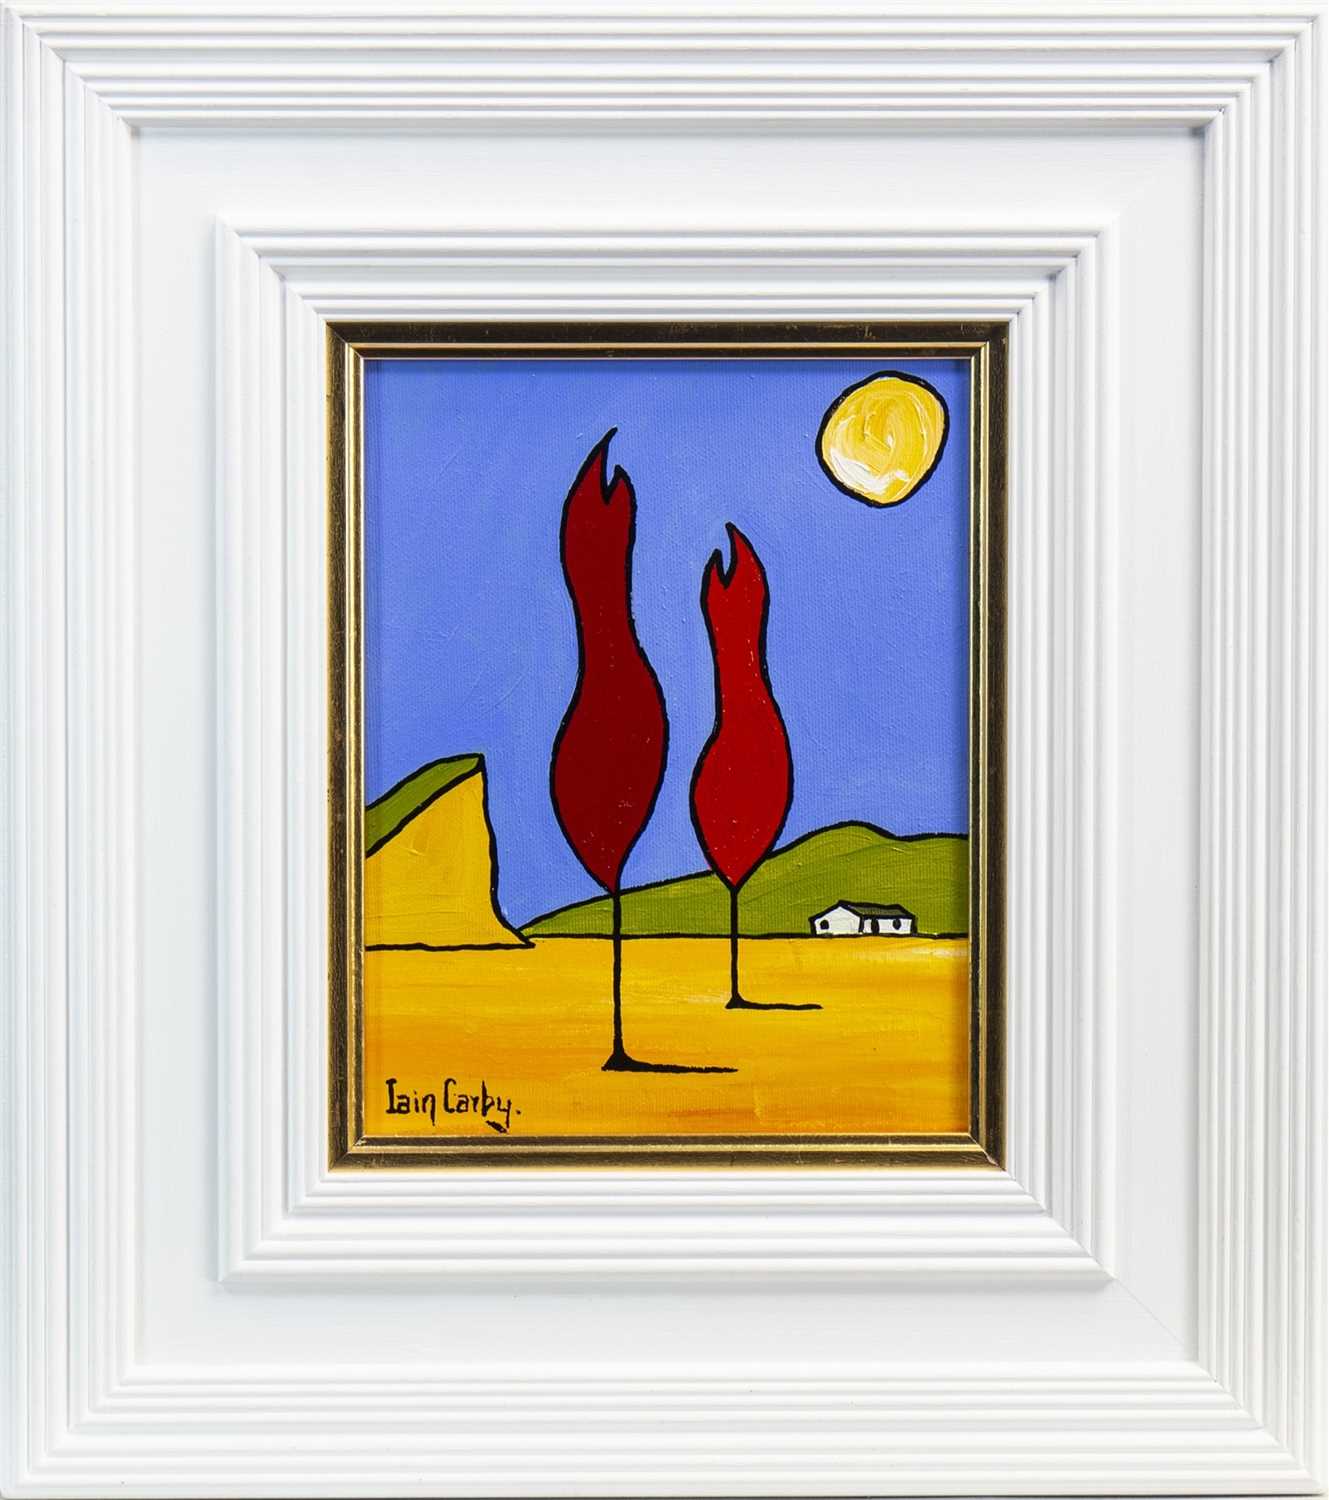 Lot 613 - TWO RED TREES TALKING TO THE MOON, AN OIL BY IAIN CARBY